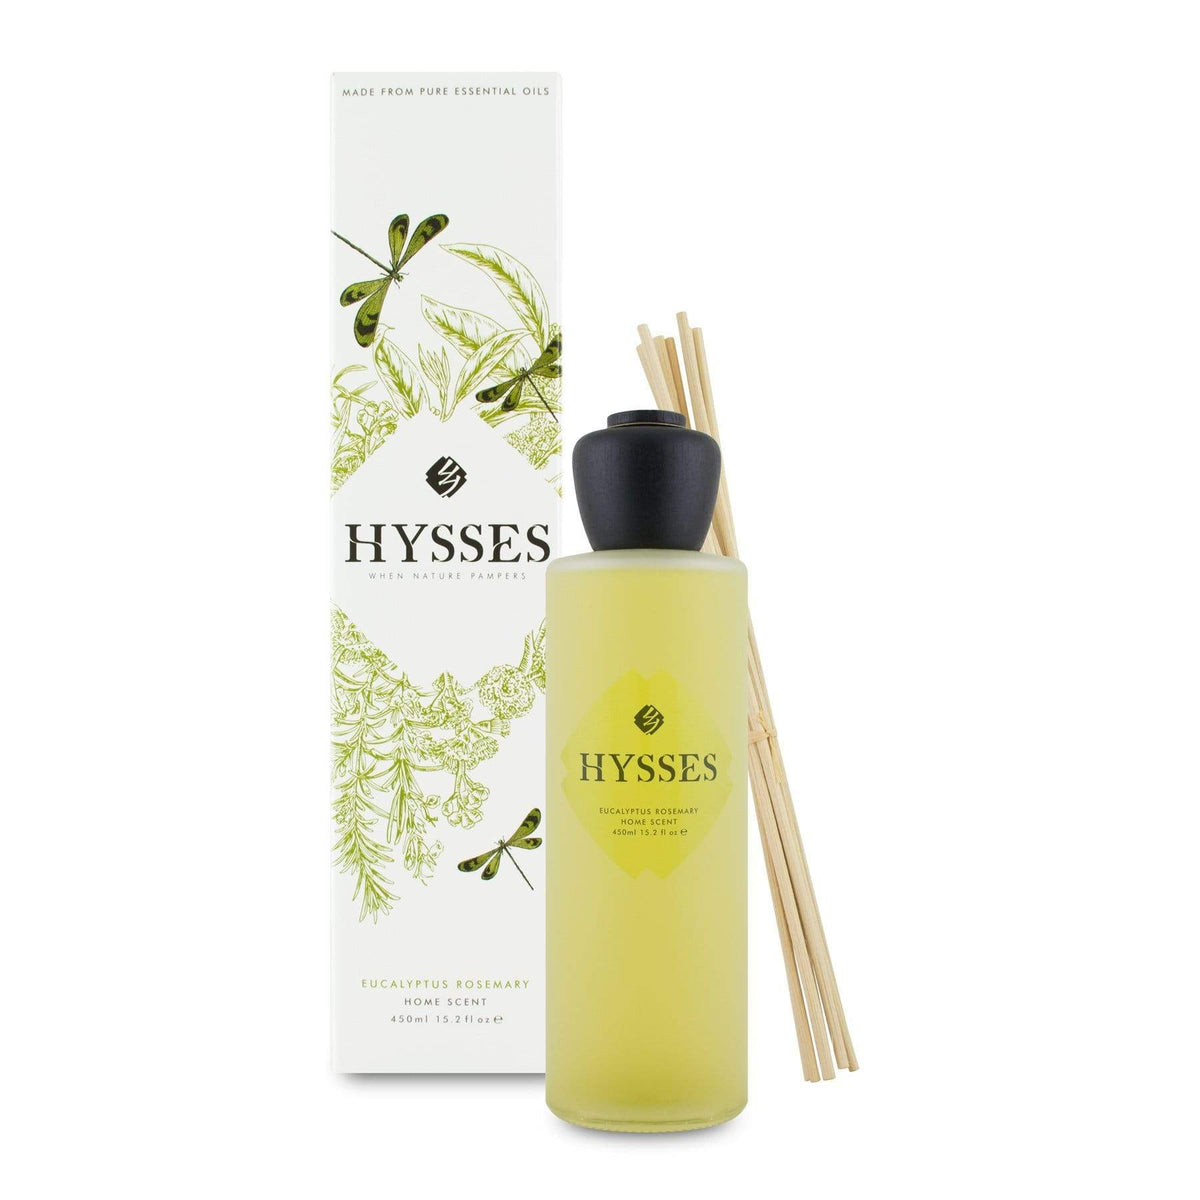 Hysses Home Scents 450ml Home Scent Reed Diffuser Eucalyptus Rosemary